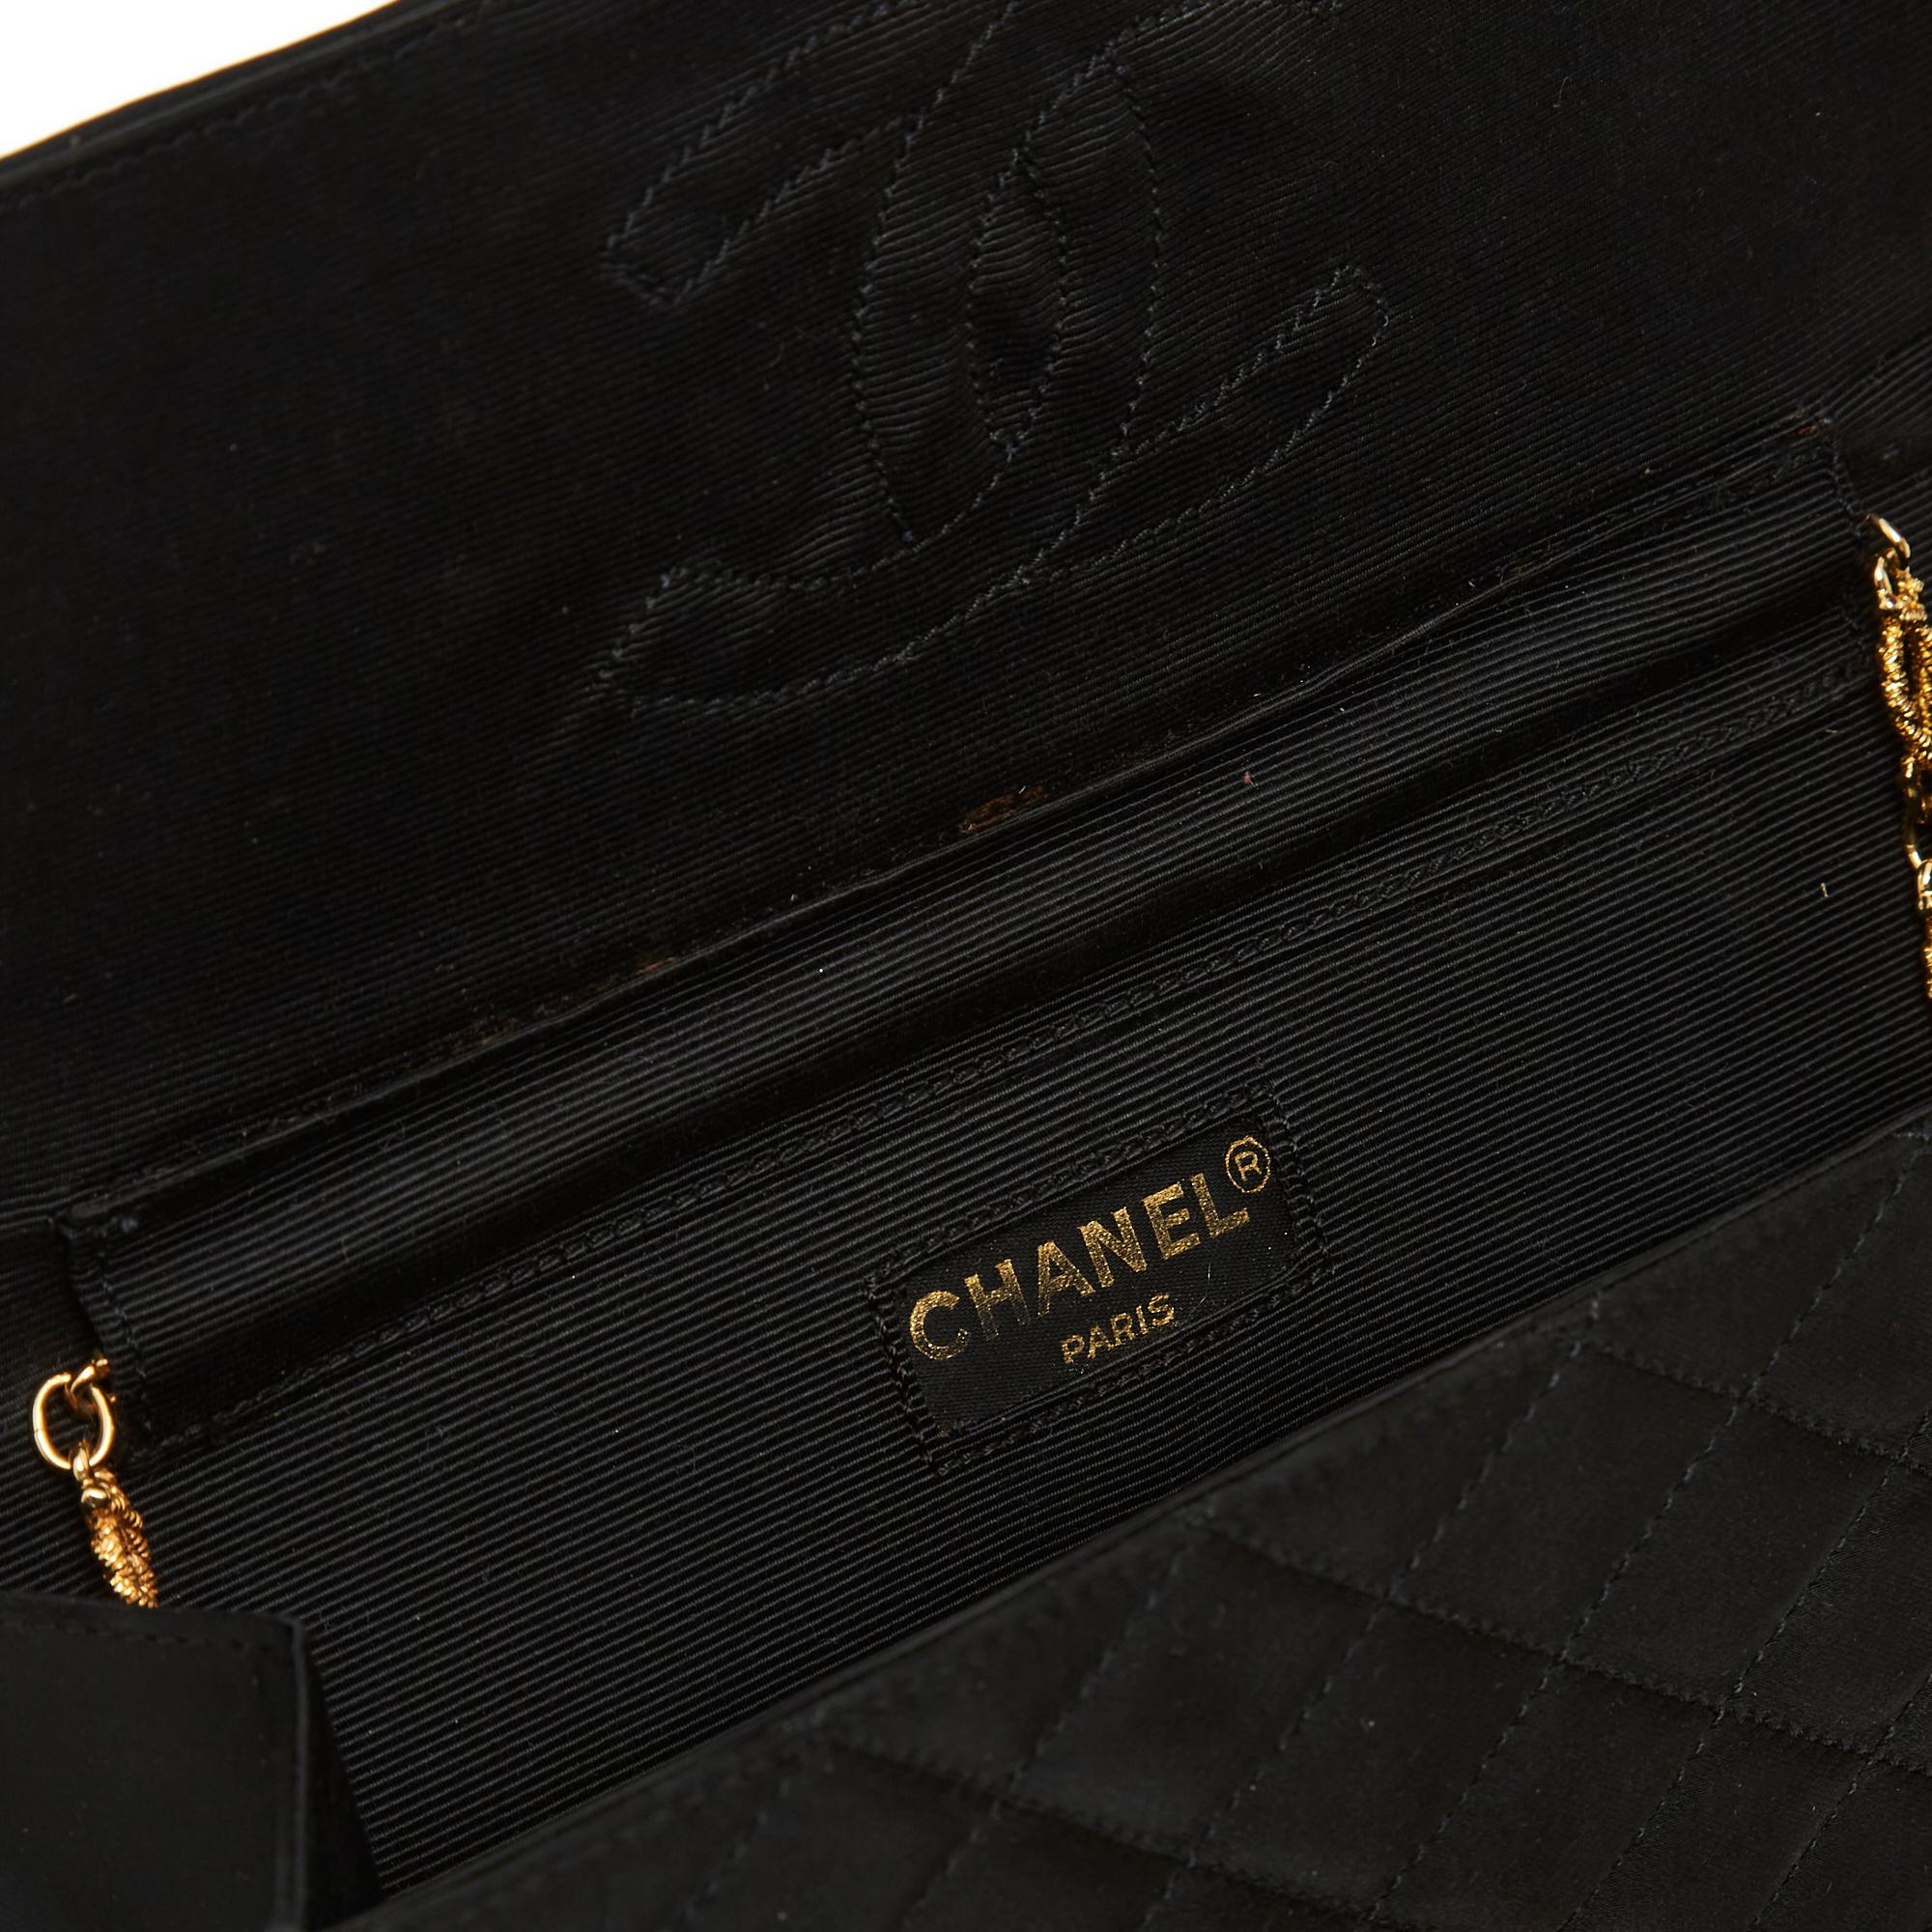 Chanel Bag 1996 Haute Couture Quilted silk satin black  For Sale 4